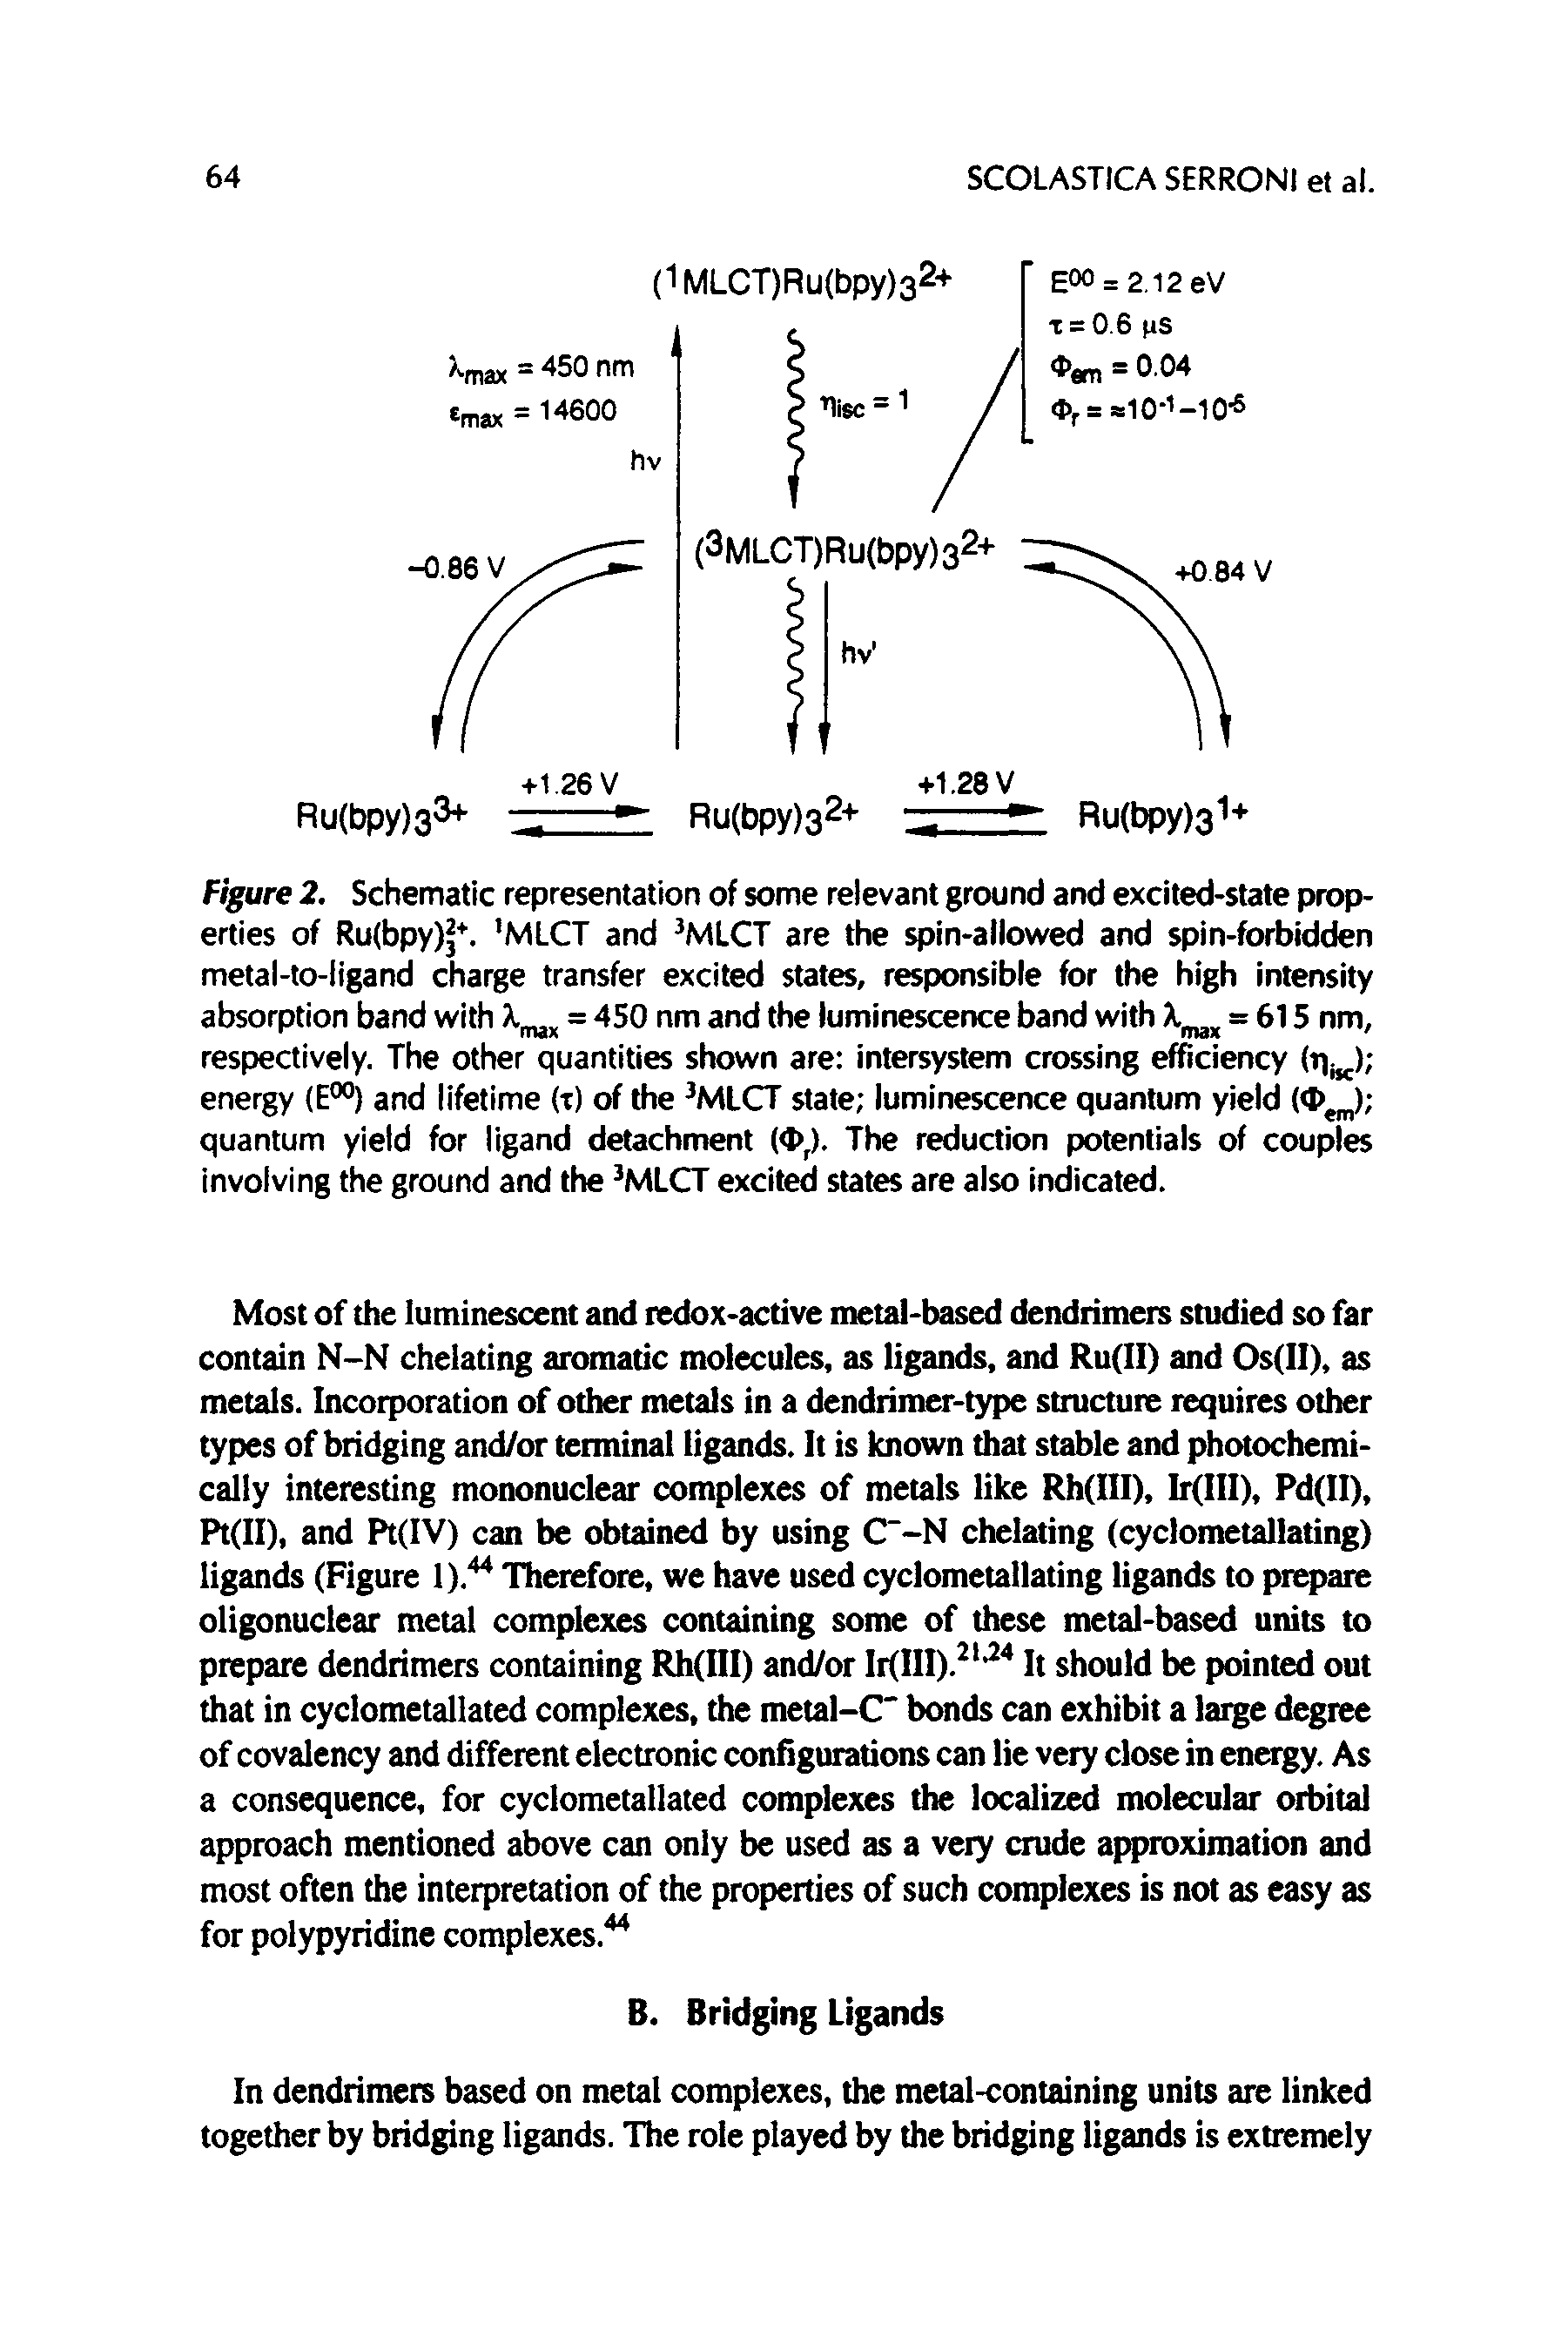 Figure 2. Schematic representation of some relevant ground and excited-state properties of Ru(bpy)j. MLCT and MLCT are the spin-allowed and spin-forbidden metal-to-ligand charge transfer excited states, responsible for the high intensity absorption band with = 450 nm and the luminescence band with = 615 nm, respectively. The other quantities shown are intersystem crossing efficiency energy (E°°) and lifetime (x) of the MLCT state luminescence quantum yield (<I> ) quantum yield for ligand detachment (O,). The reduction potentials of couples involving the ground and the MLCT excited states are also indicated.